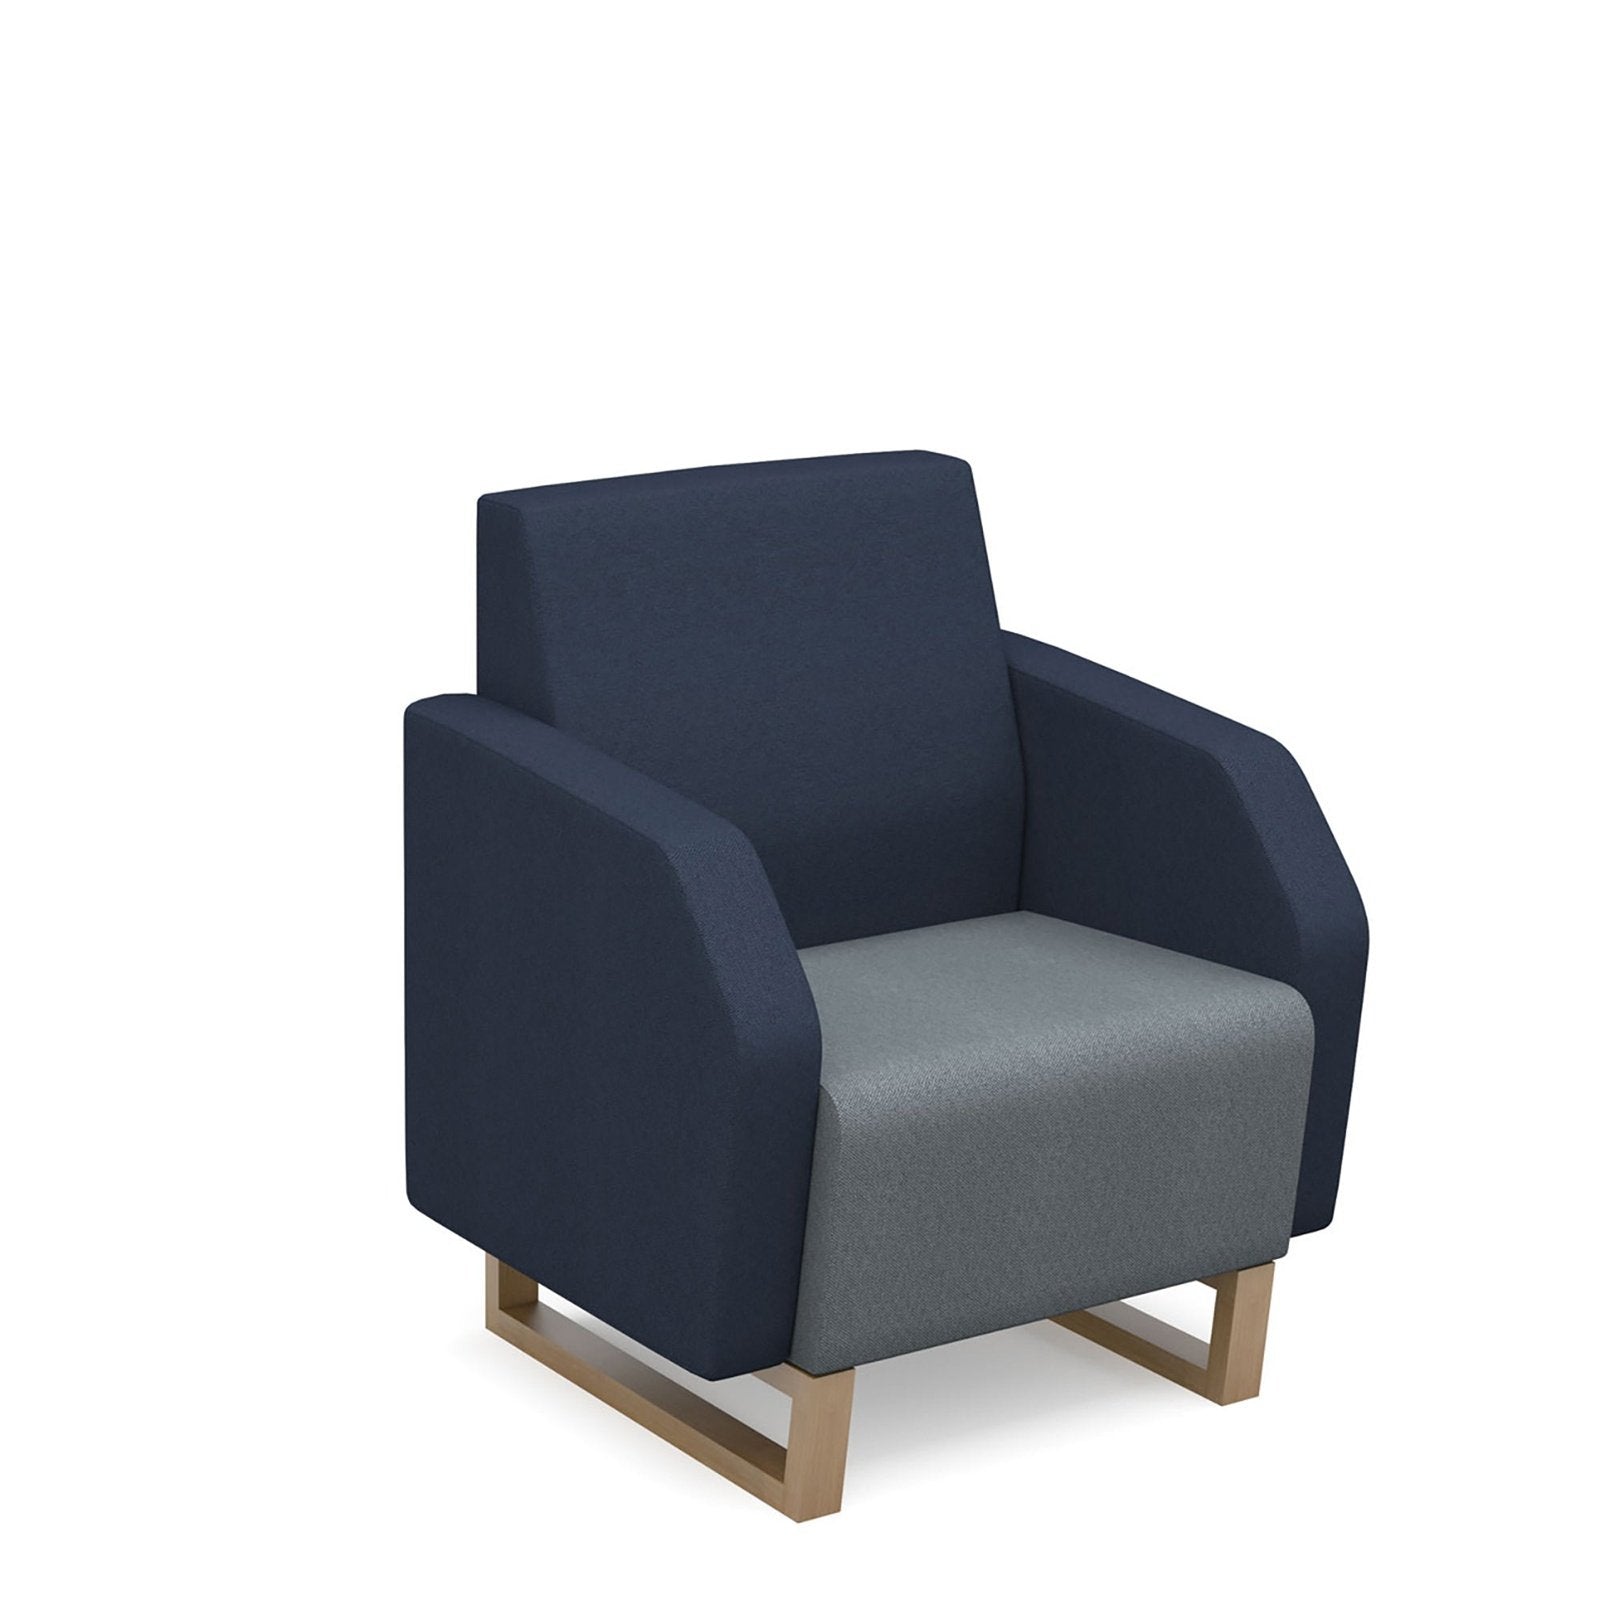 Encore² low back 1 seater sofa - Office Products Online